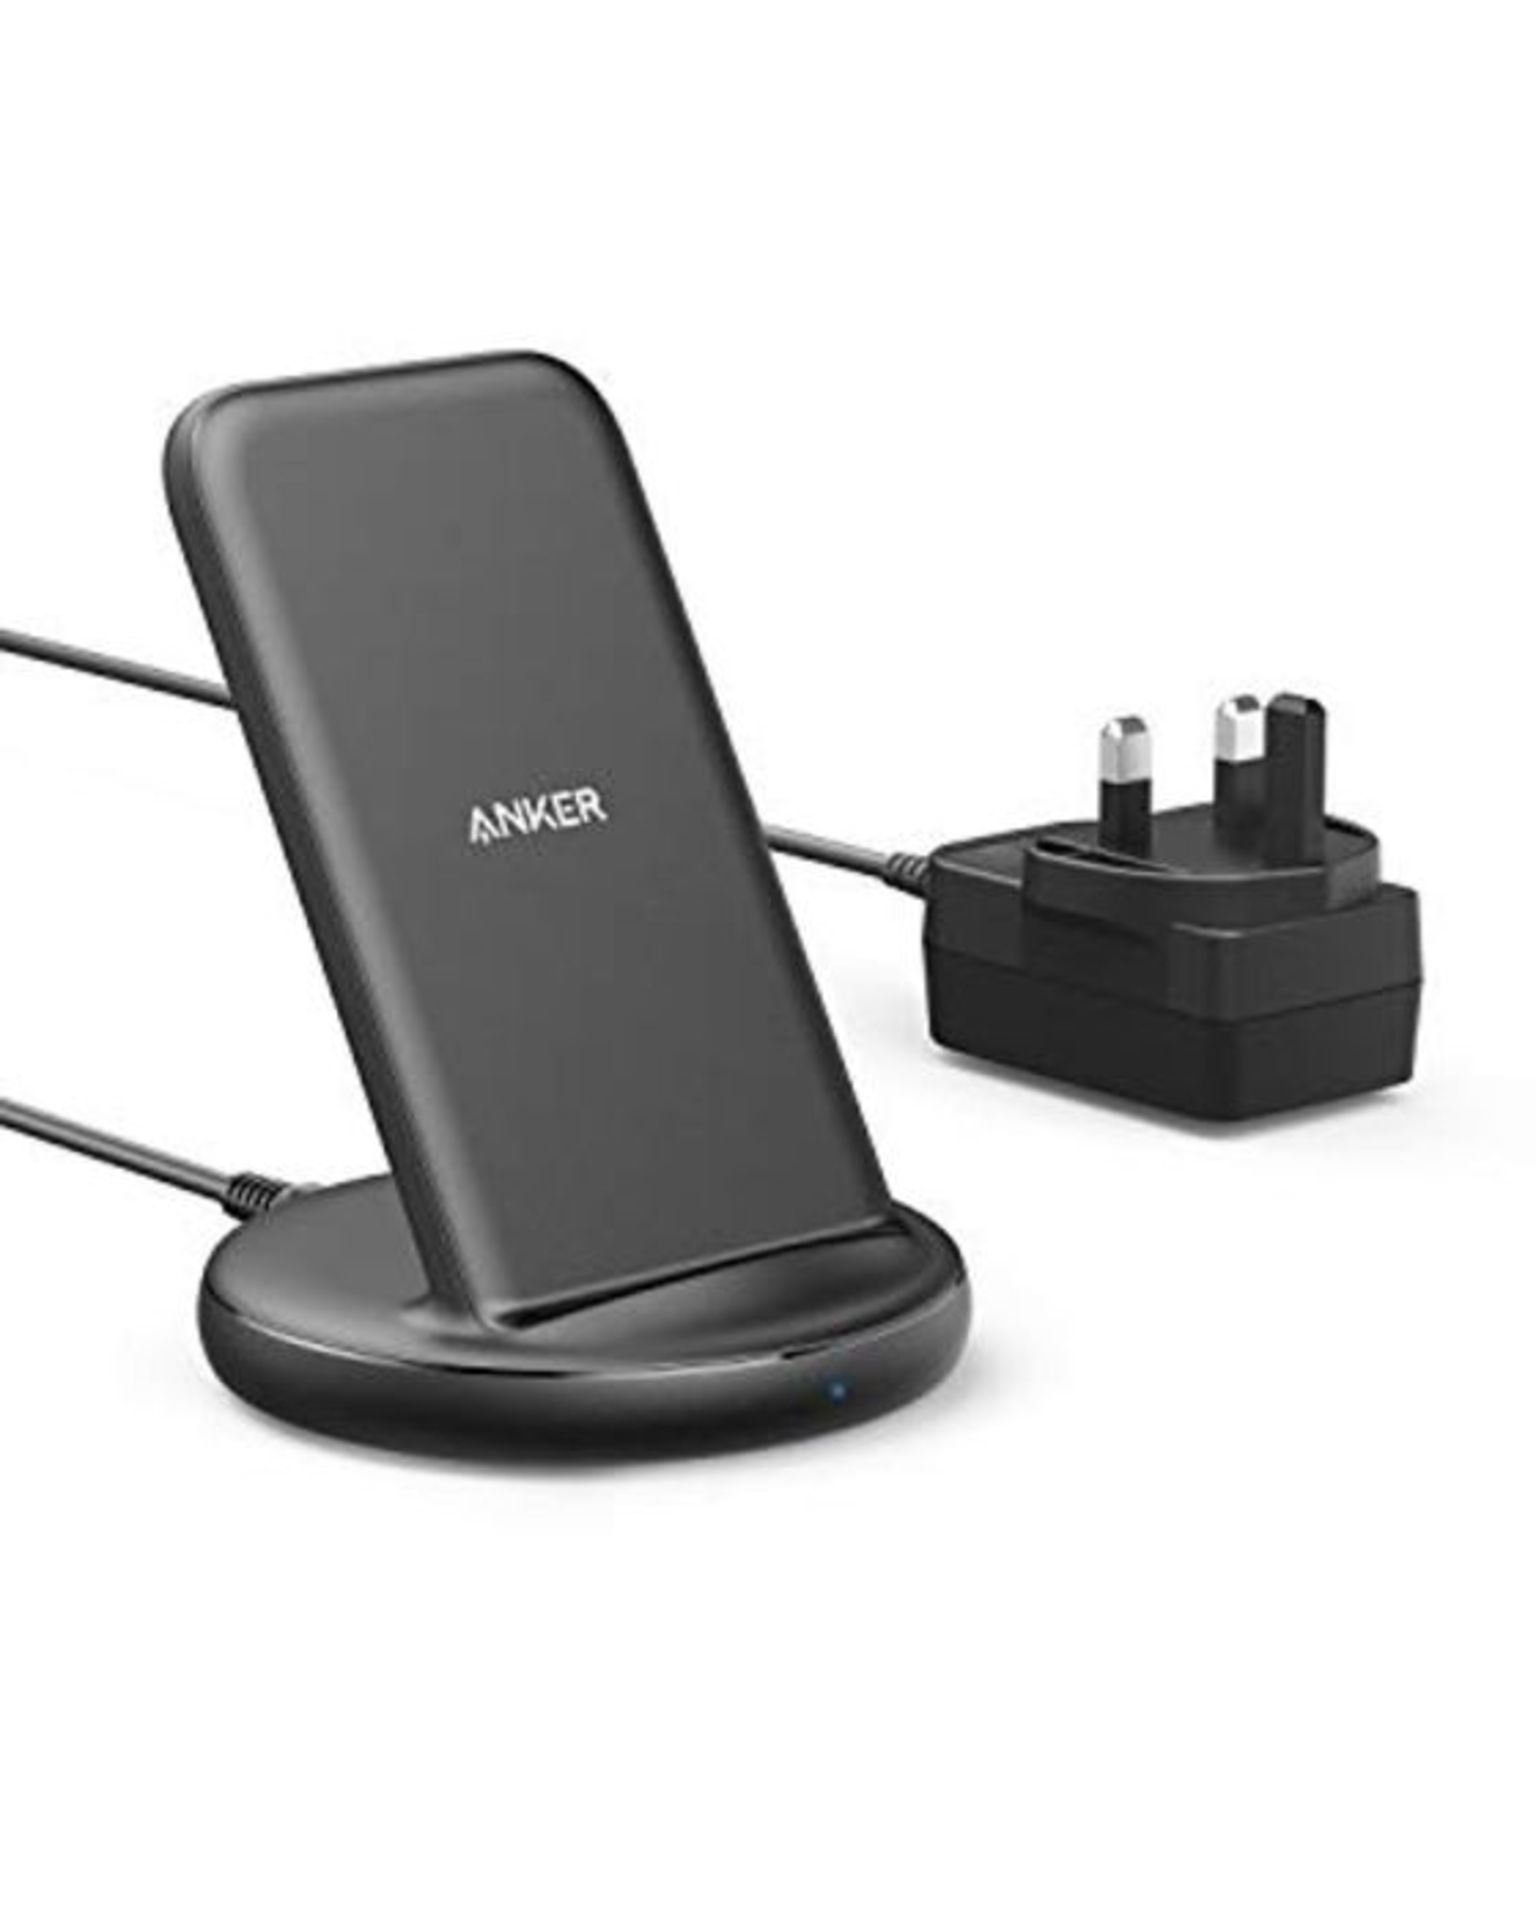 Anker Wireless Charger with Power Adapter, PowerWave II Stand, Qi-Certified 15W Max Fa